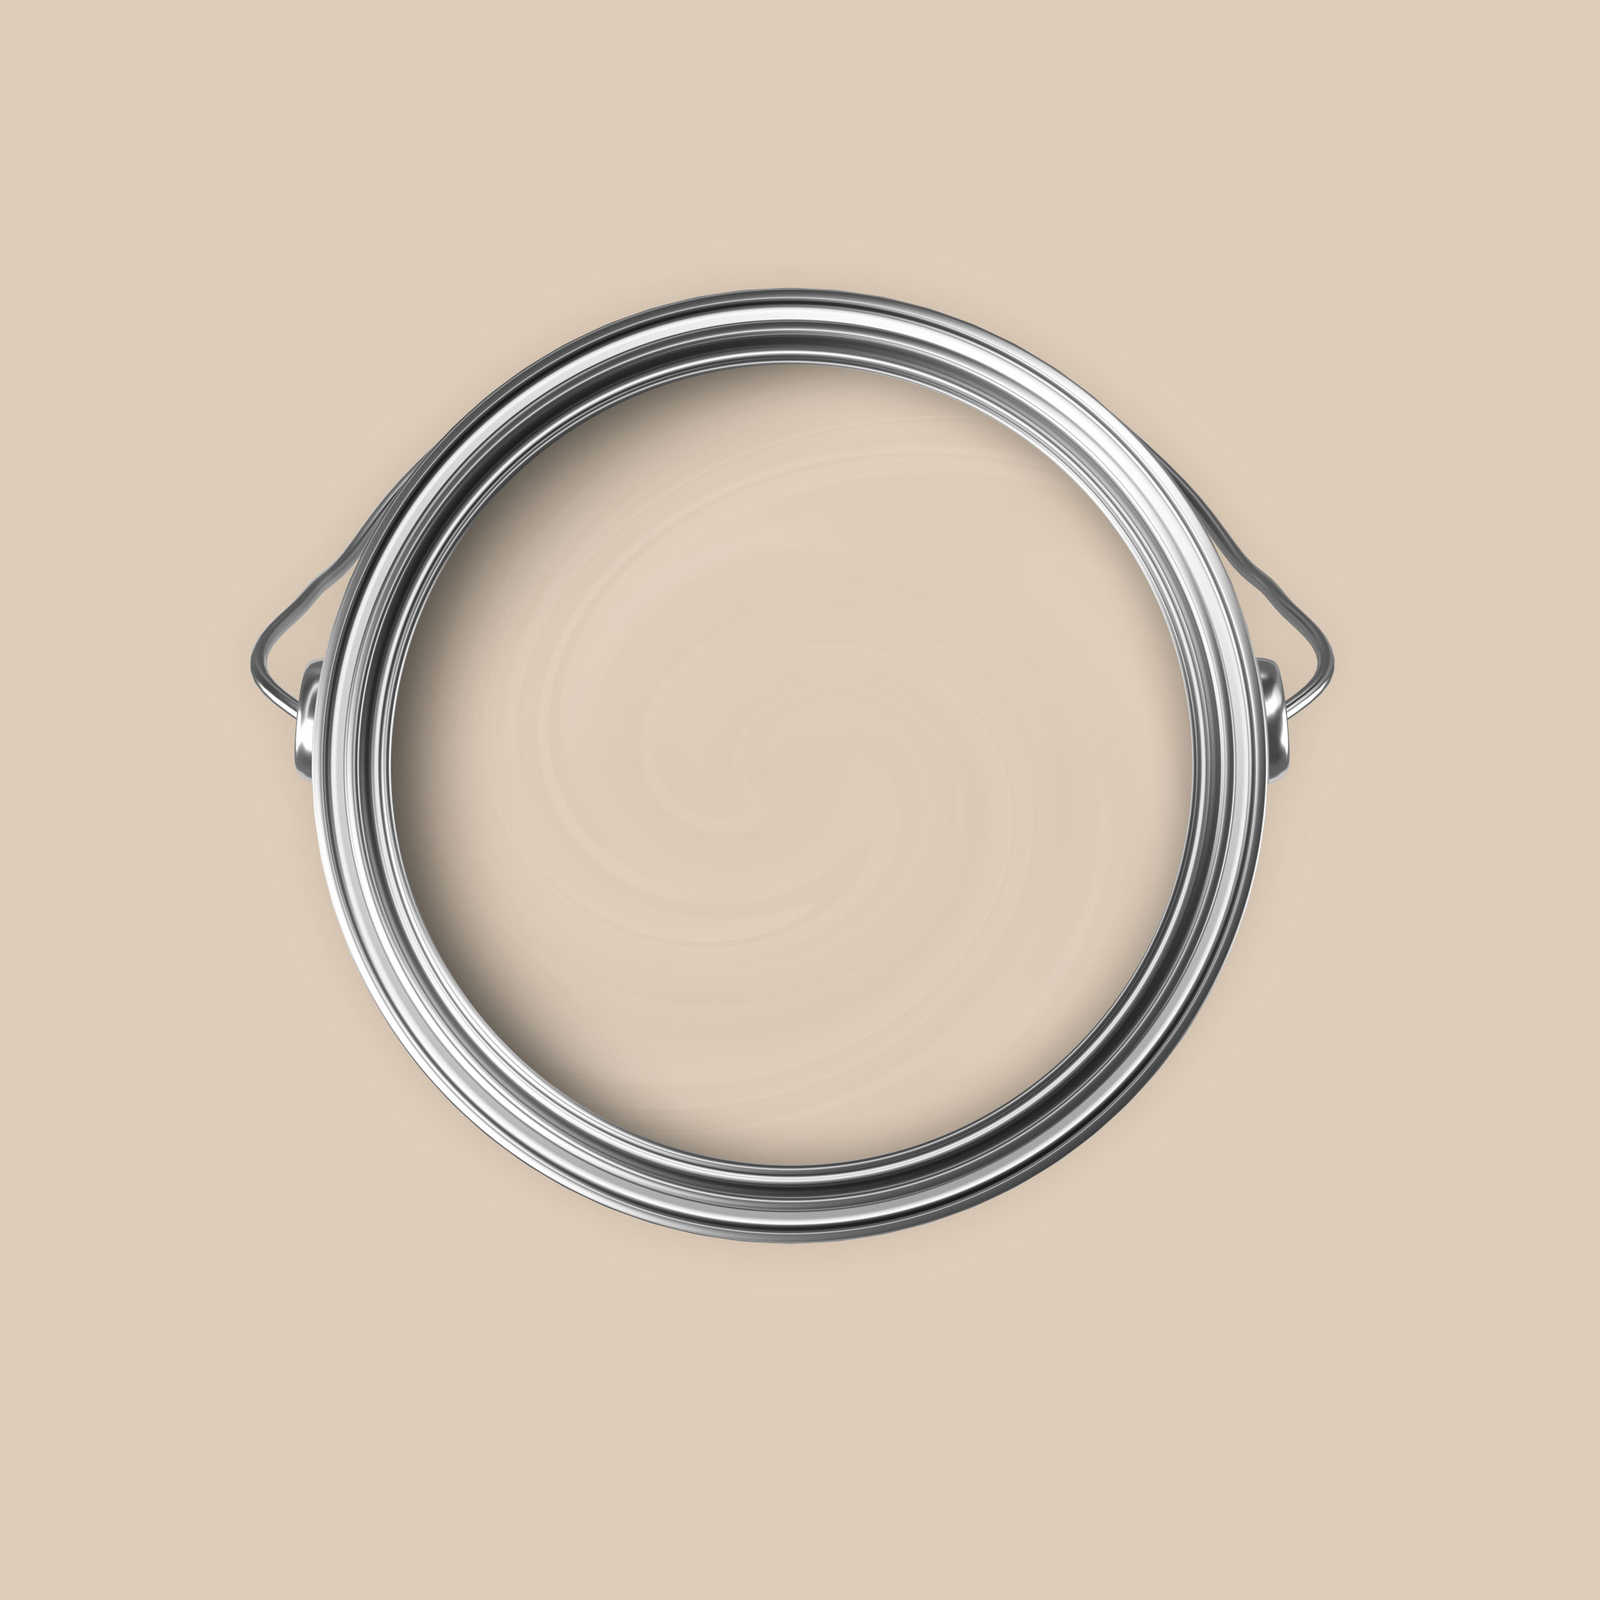             Premium Wall Paint cosy light beige »Modern Mud« NW714 – 5 litre
        